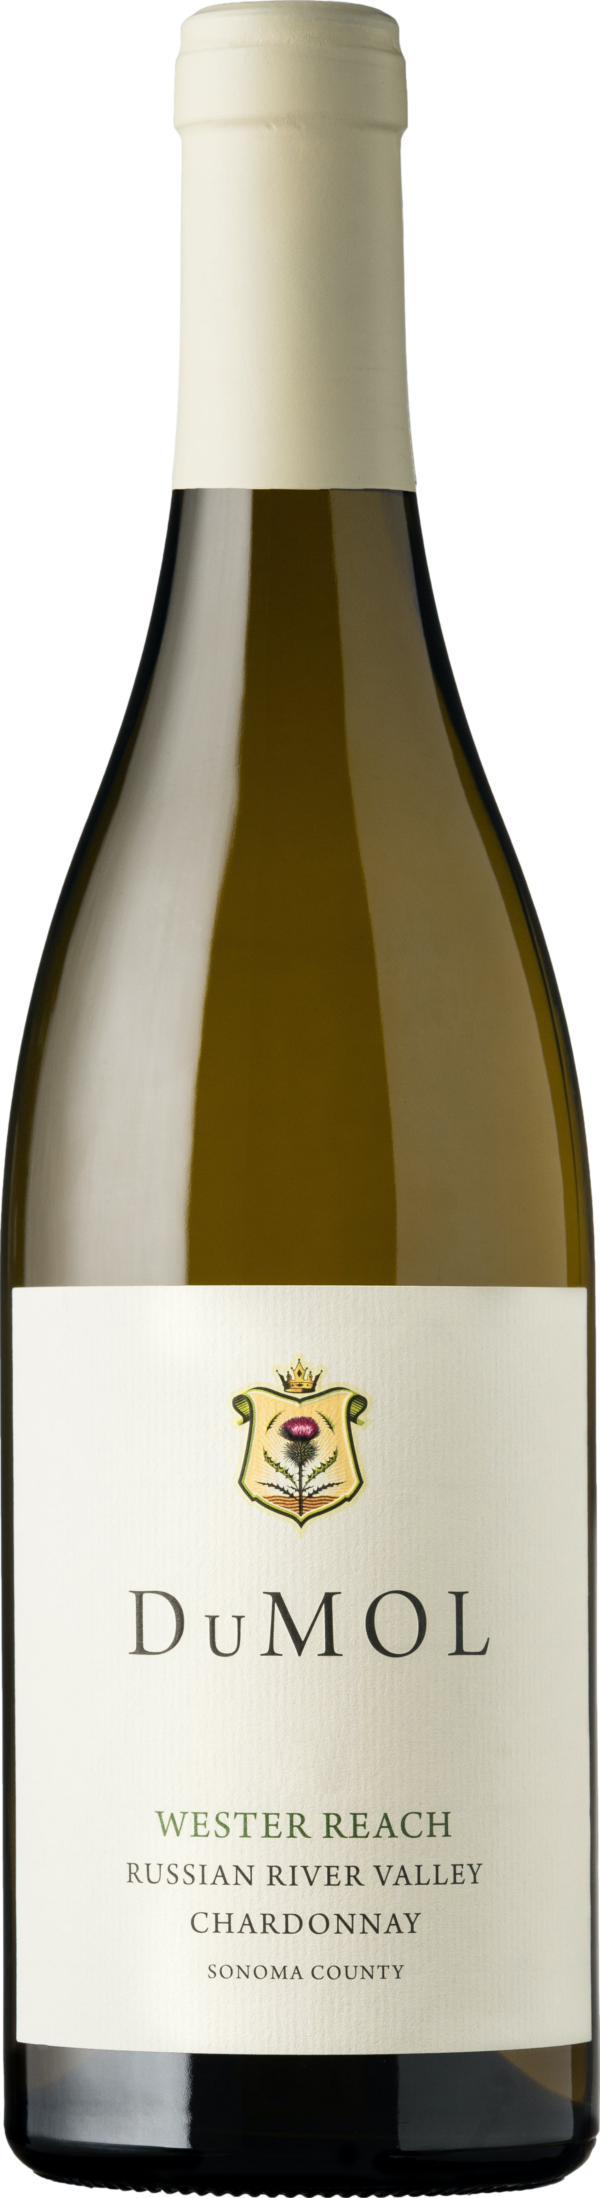 Product image of Dumol Wester Reach Chardonnay 2019 from 8wines